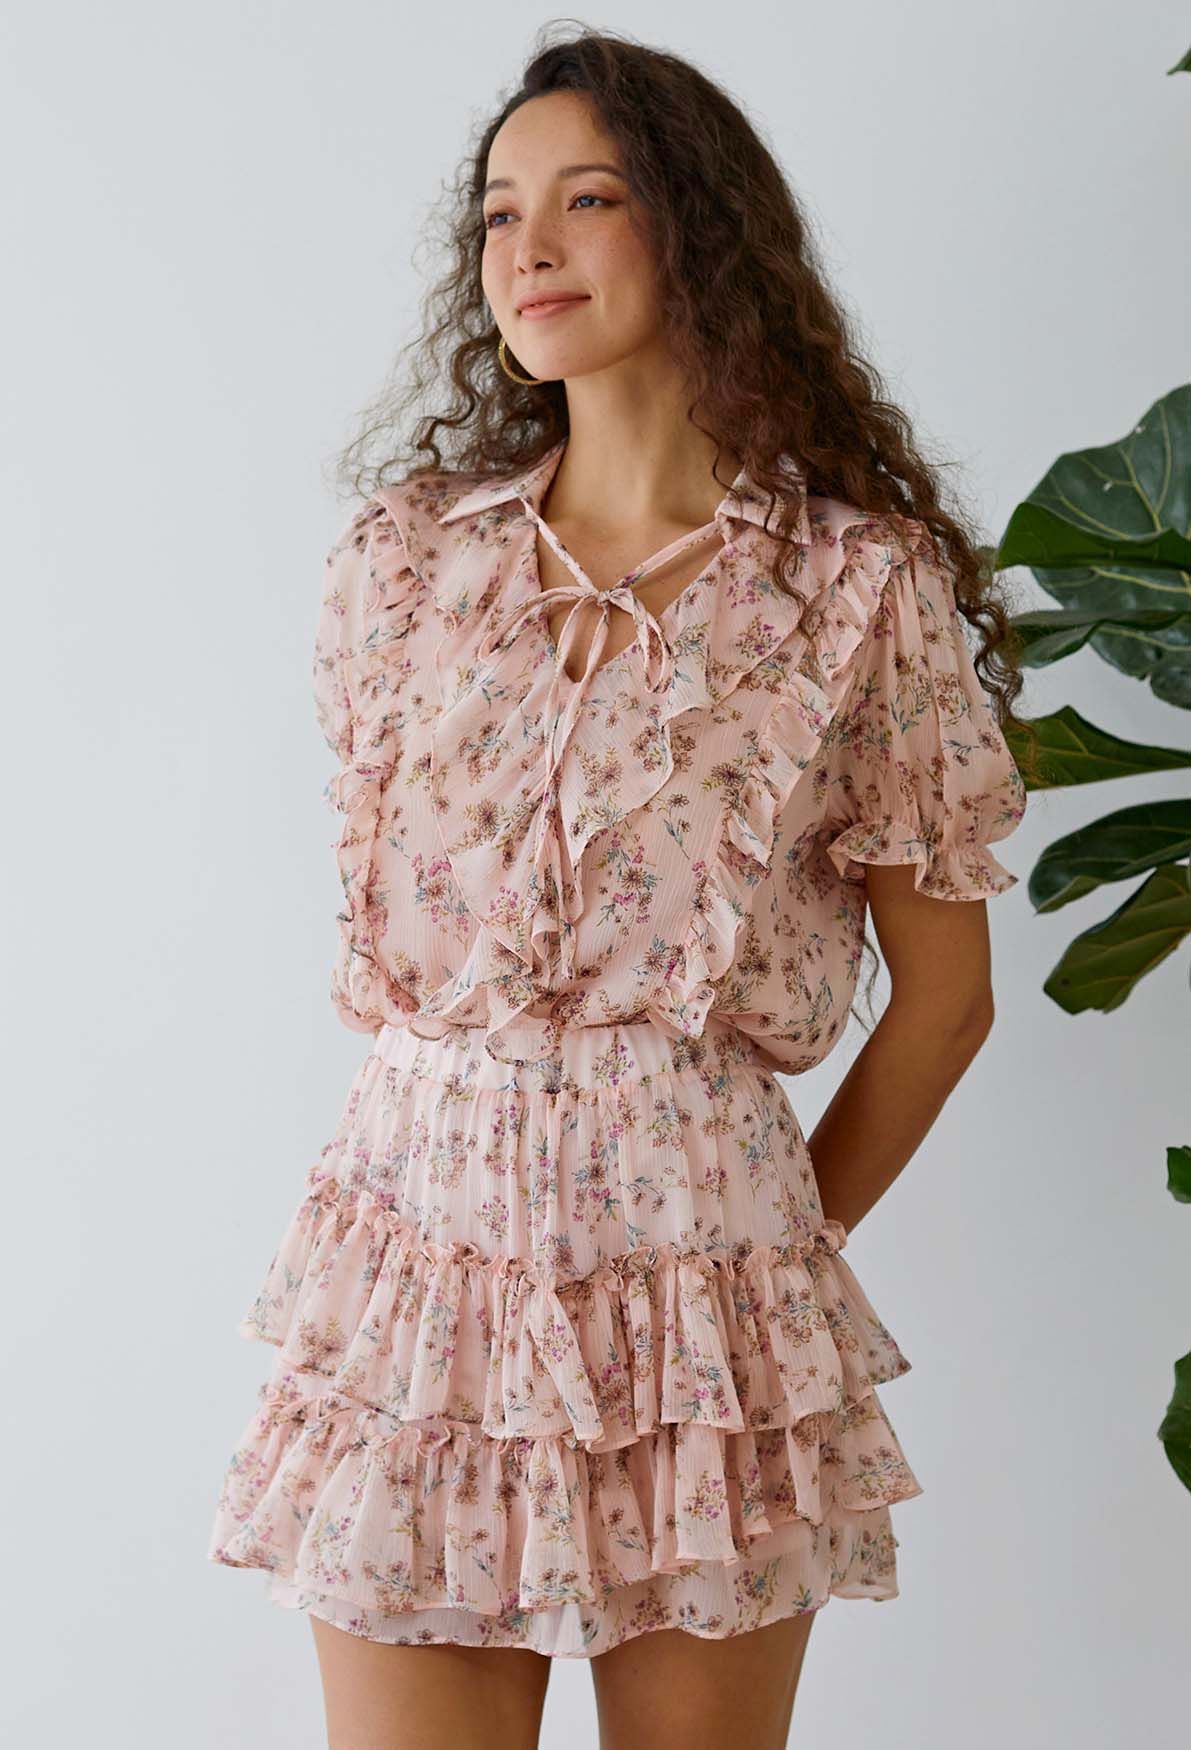 Ruffle Chiffon Top and Tiered Mini Skorts Set in Pink Floral